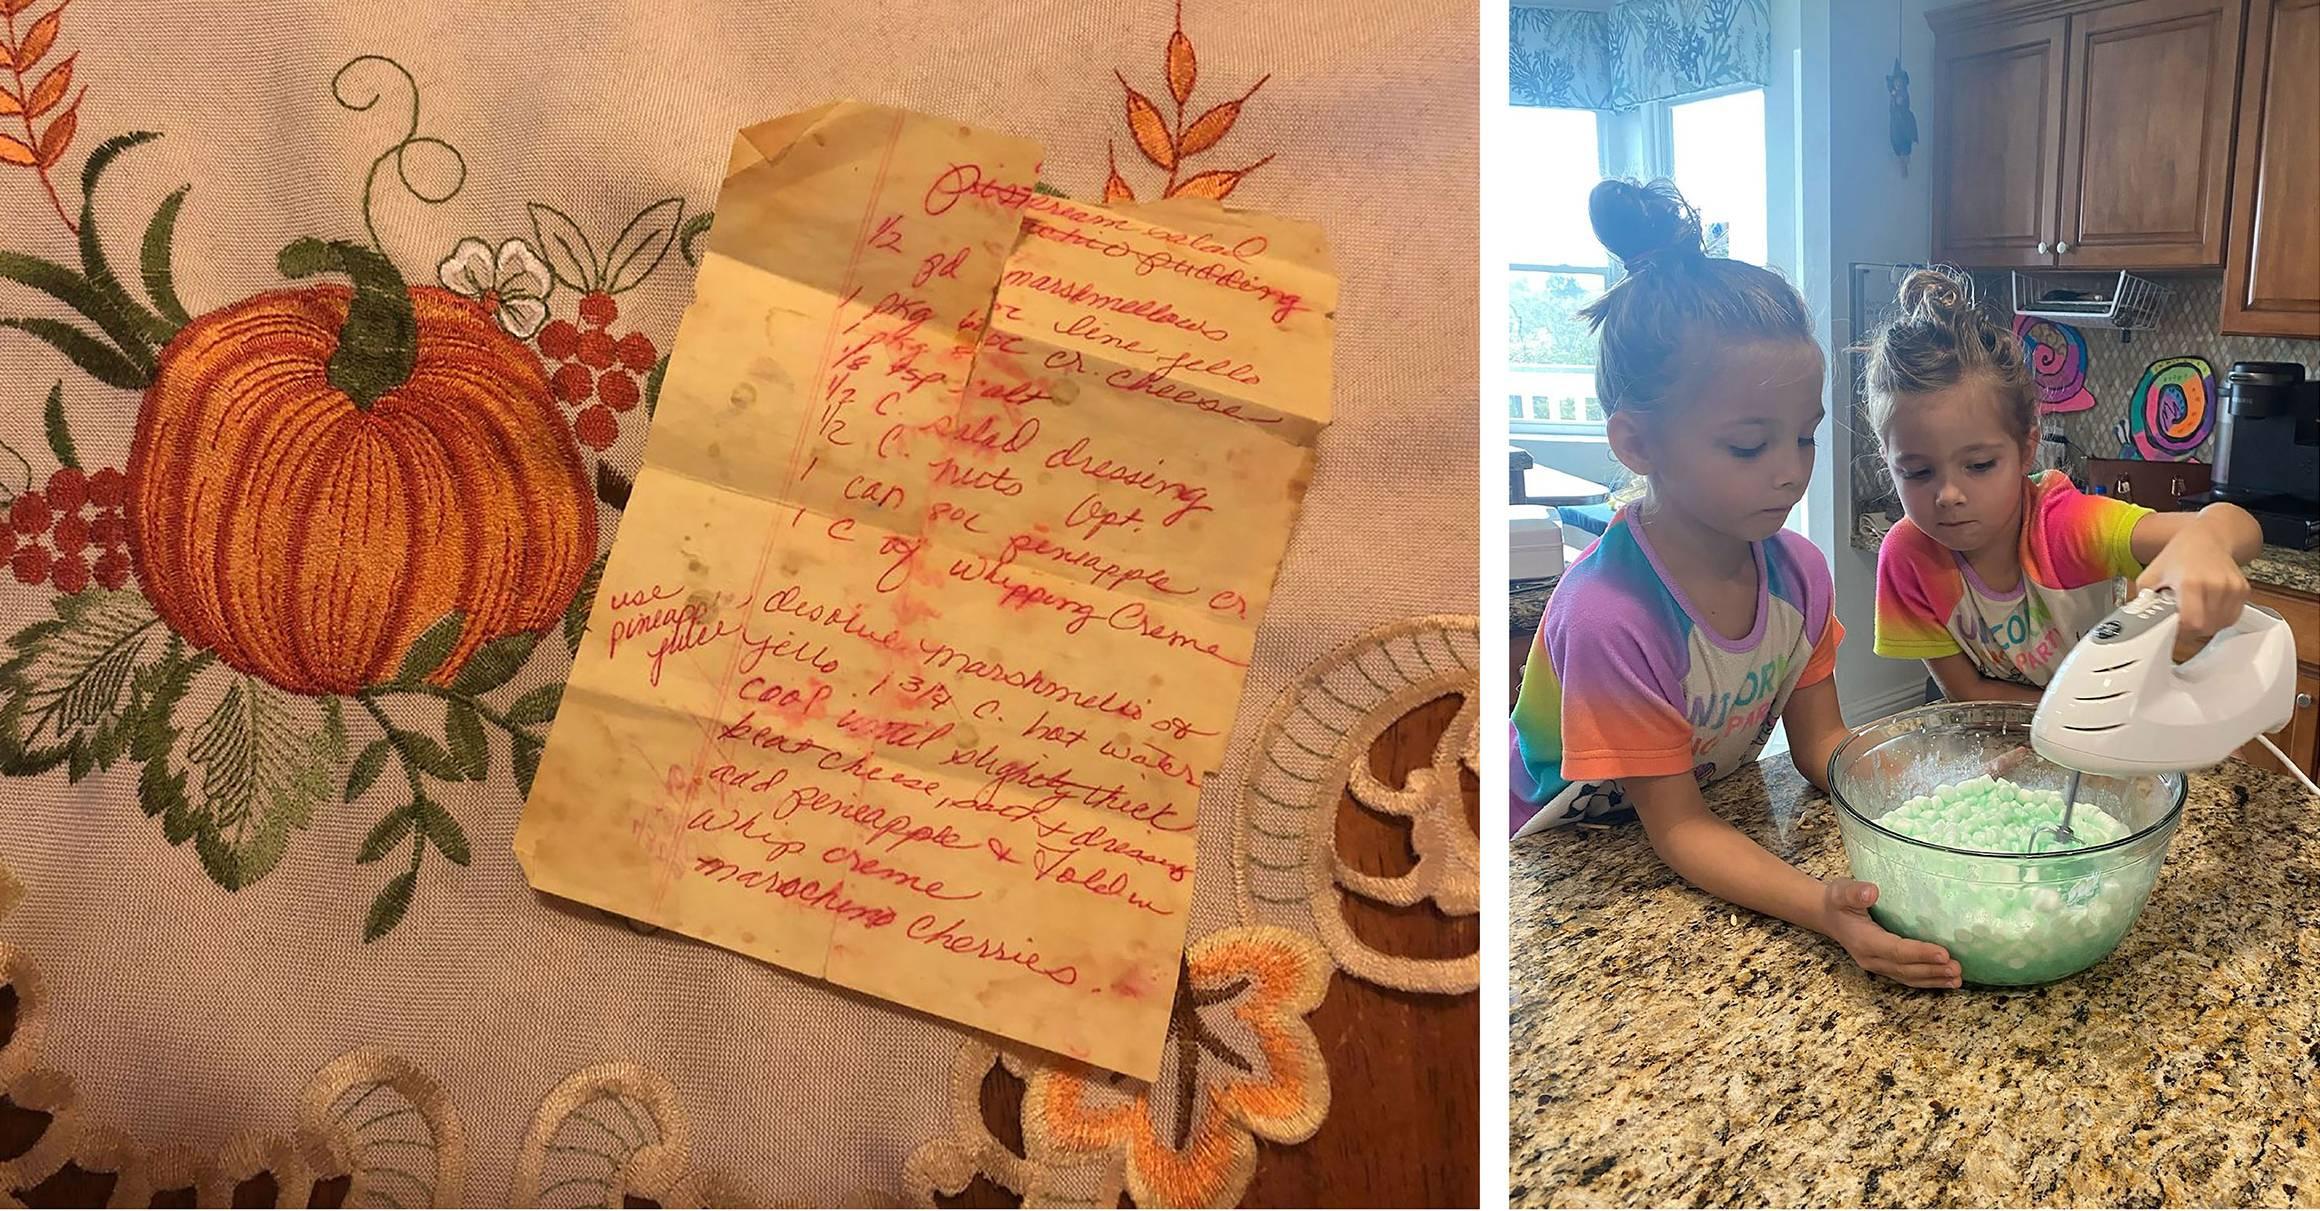 Left: The dream salad recipe, written down by Lisa Baldacci over 40 years ago. Right: Baldacci's twin granddaughters, Alora and Luna Billig, 6, cook the dream salad. (Courtesy Lisa Baldacci)